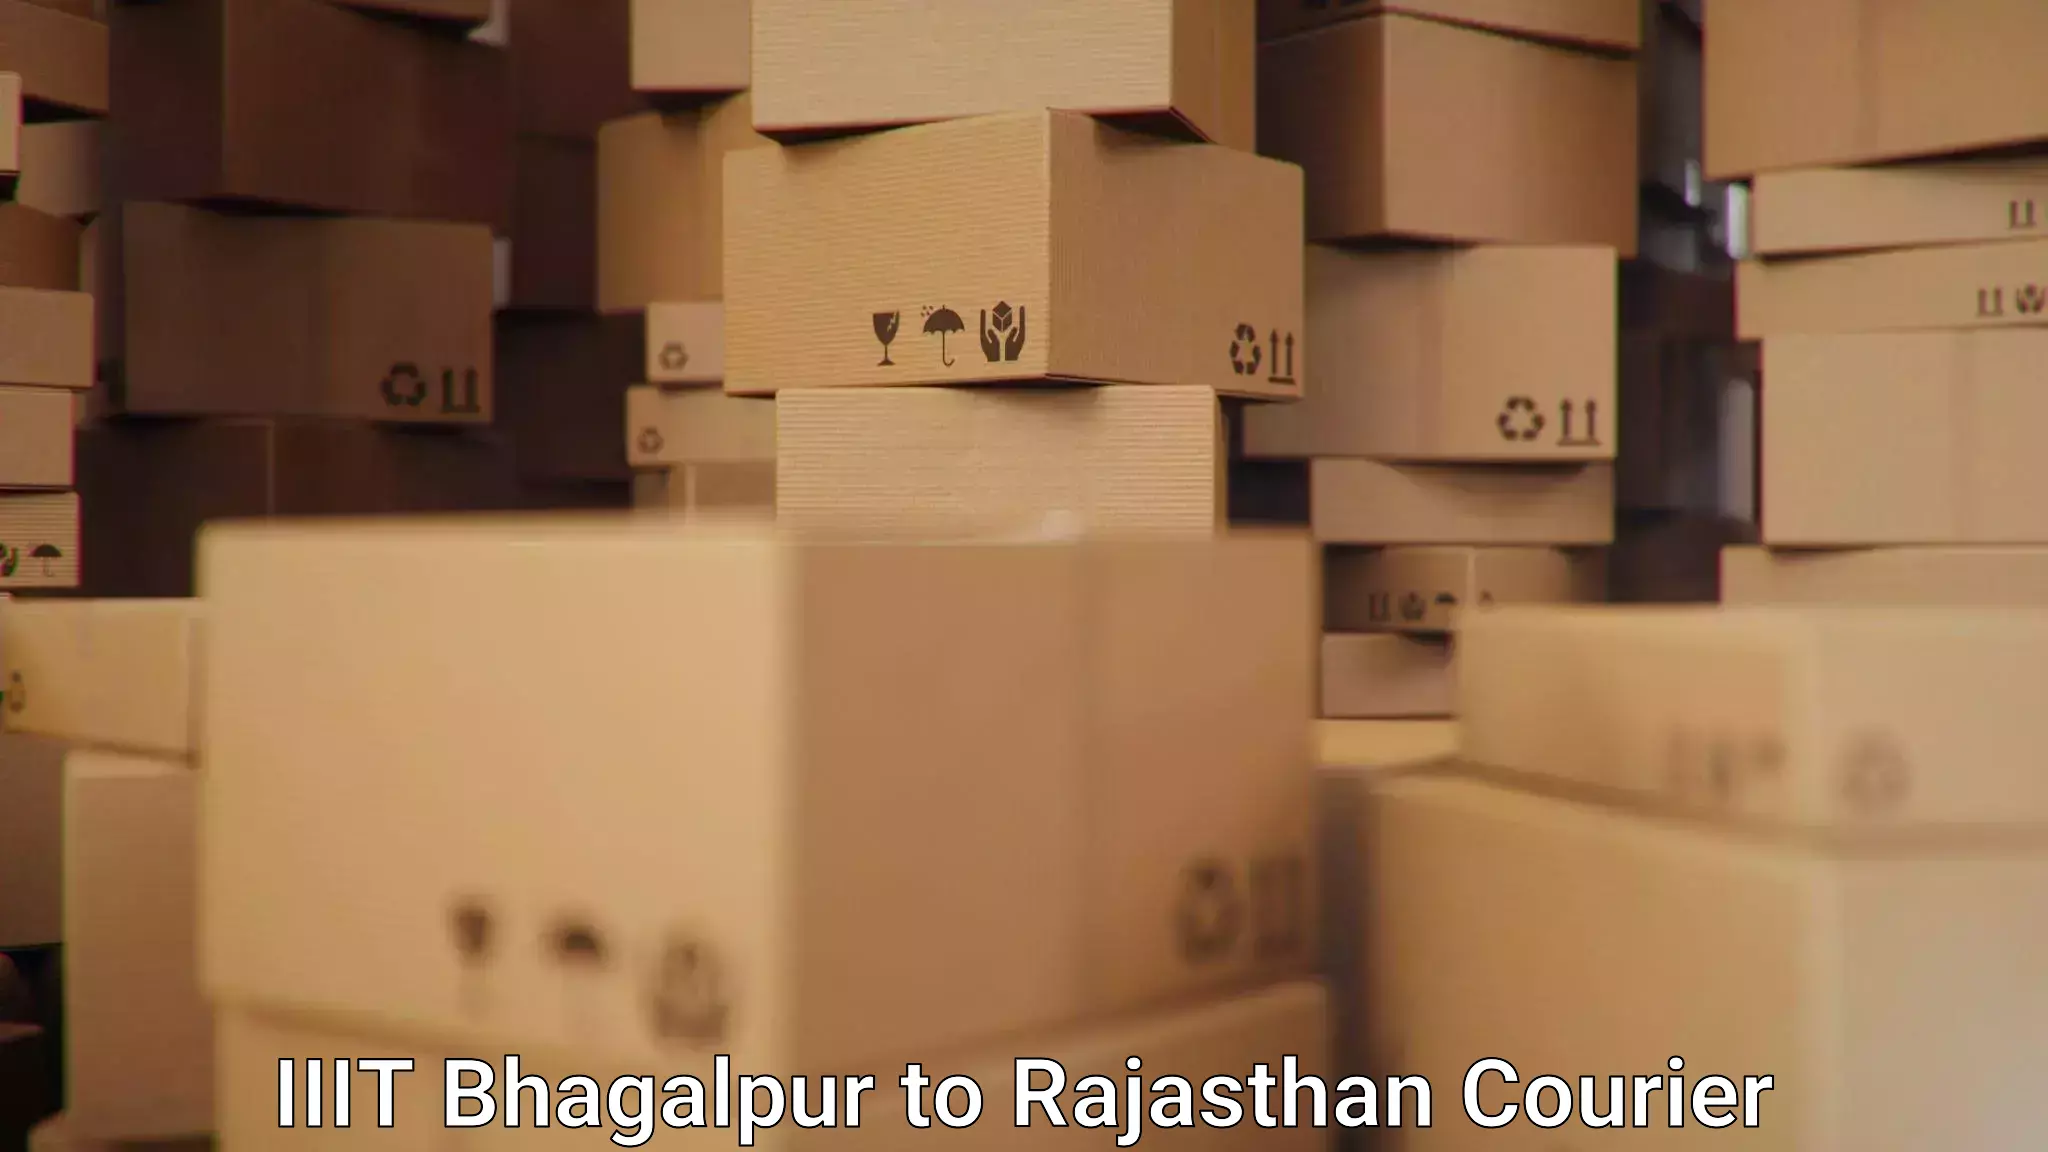 Holiday shipping services IIIT Bhagalpur to Jalore